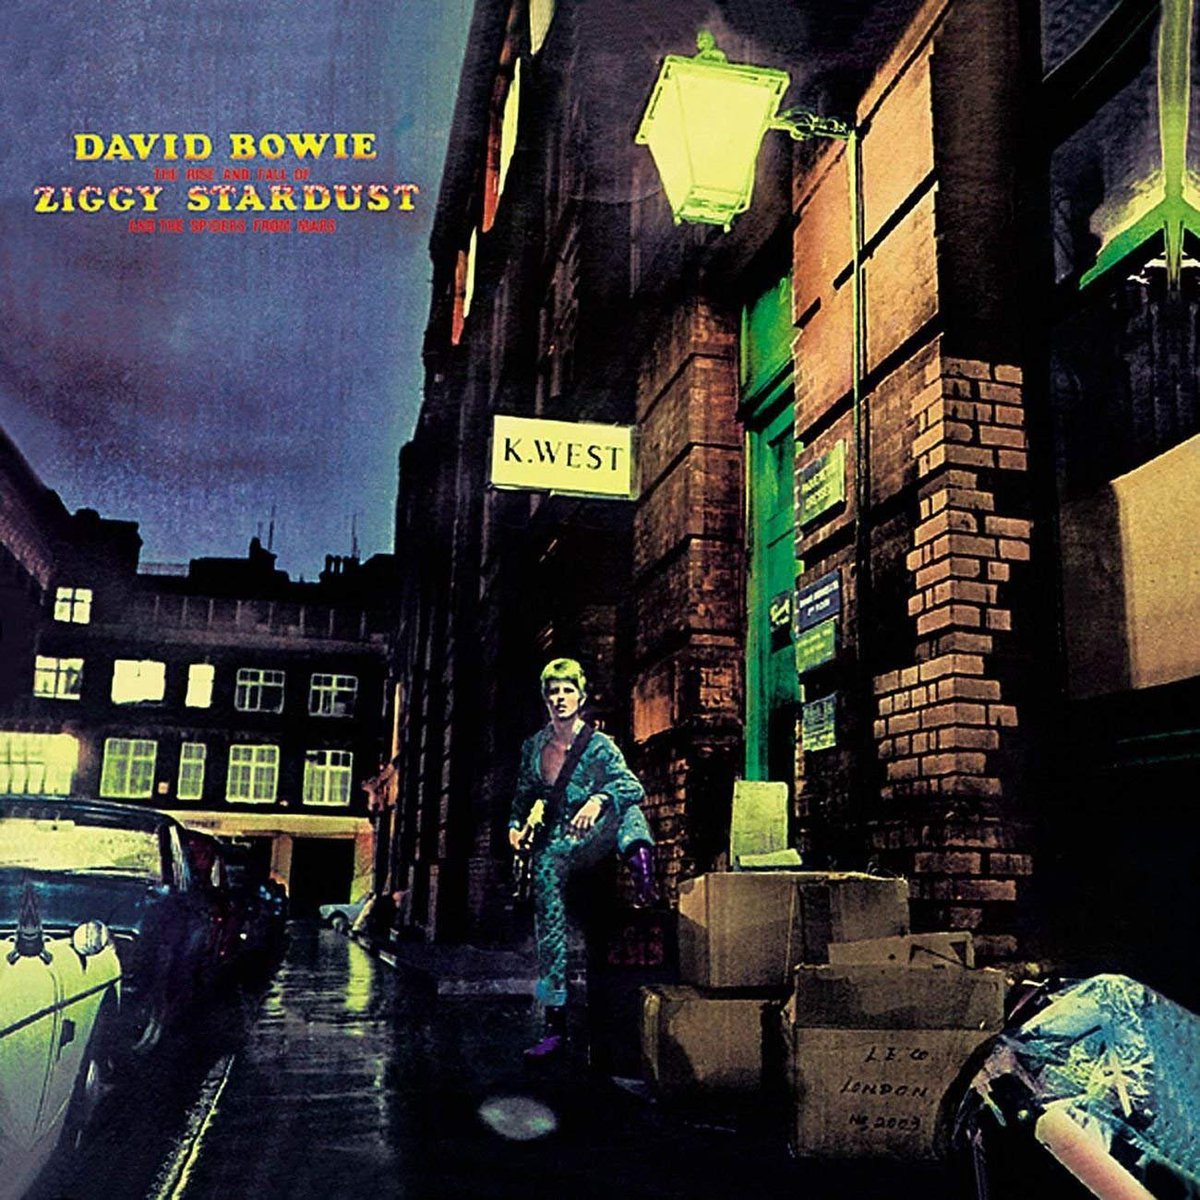 ... on several of Bowie's biggest albums, like these (my two personal favourites): Ziggy... was shot just on London's Heddon Street, which today, of course, is unrecognisable from the cover. (It's a beautiful place to have a summer drink, though.)Underwood was the designer.